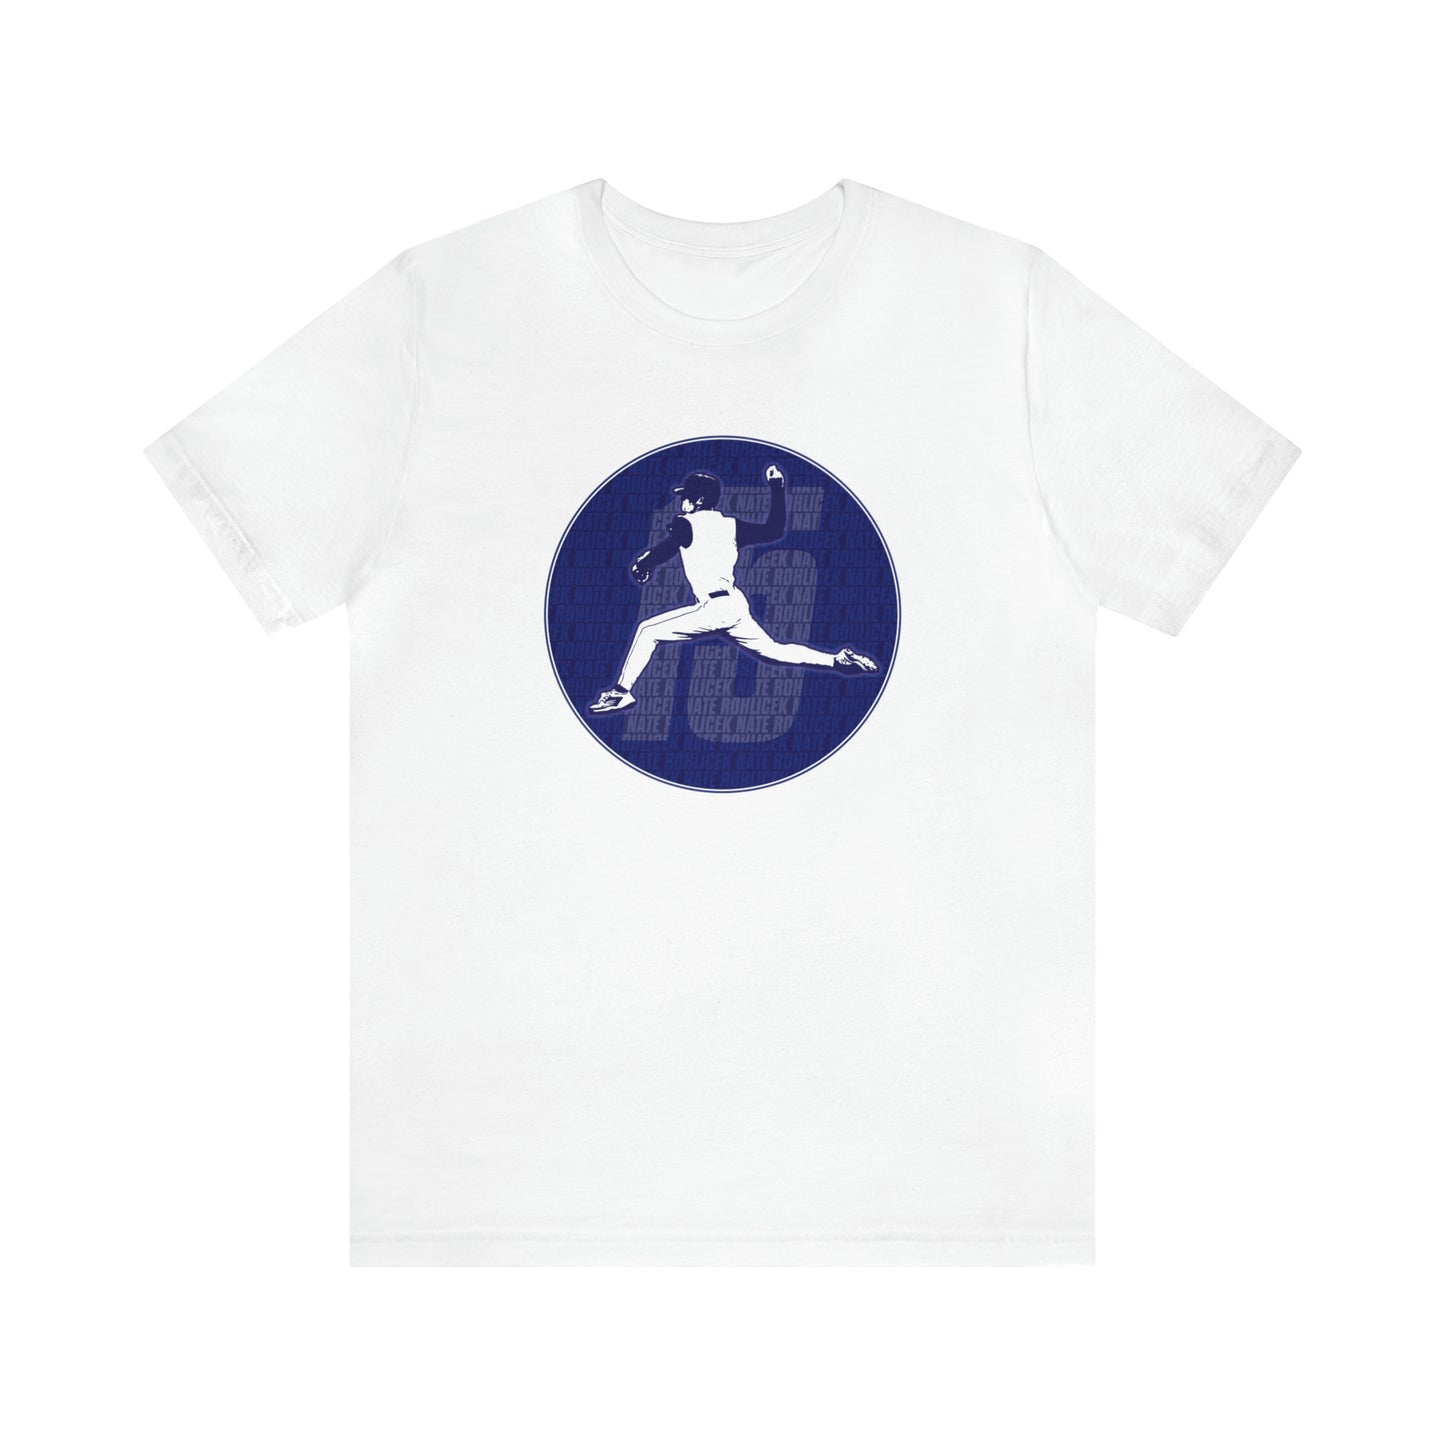 Nate Rohlicek: FastBall Tee